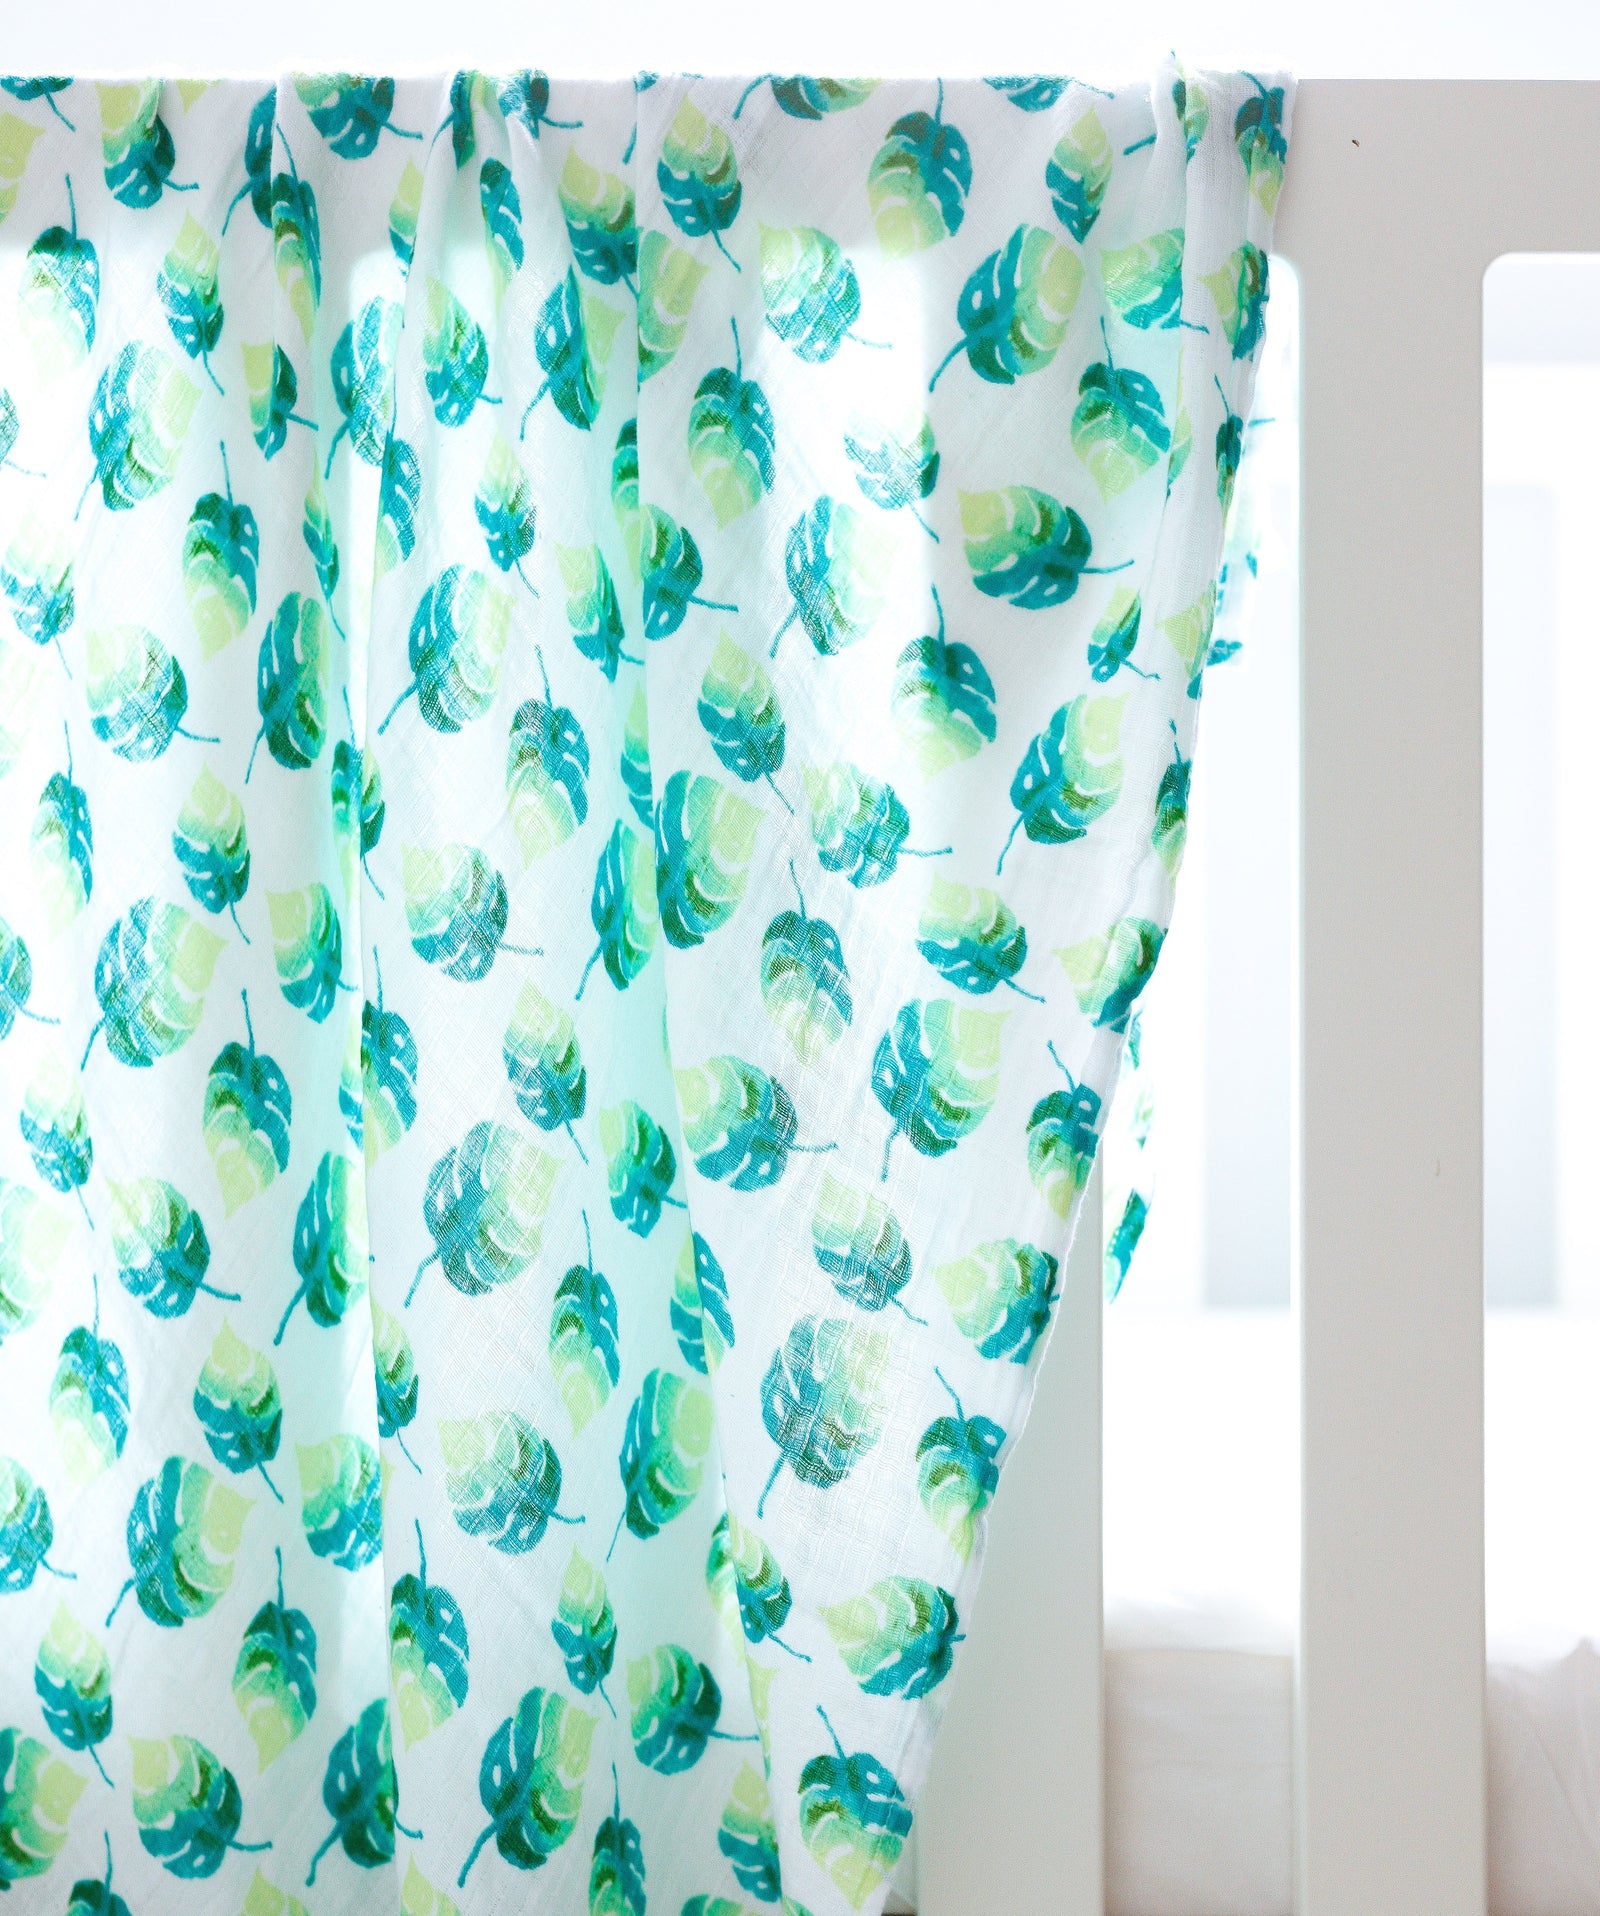 Tropical Paradise Soft Organic Cotton Swaddle Set for Home or On the Go